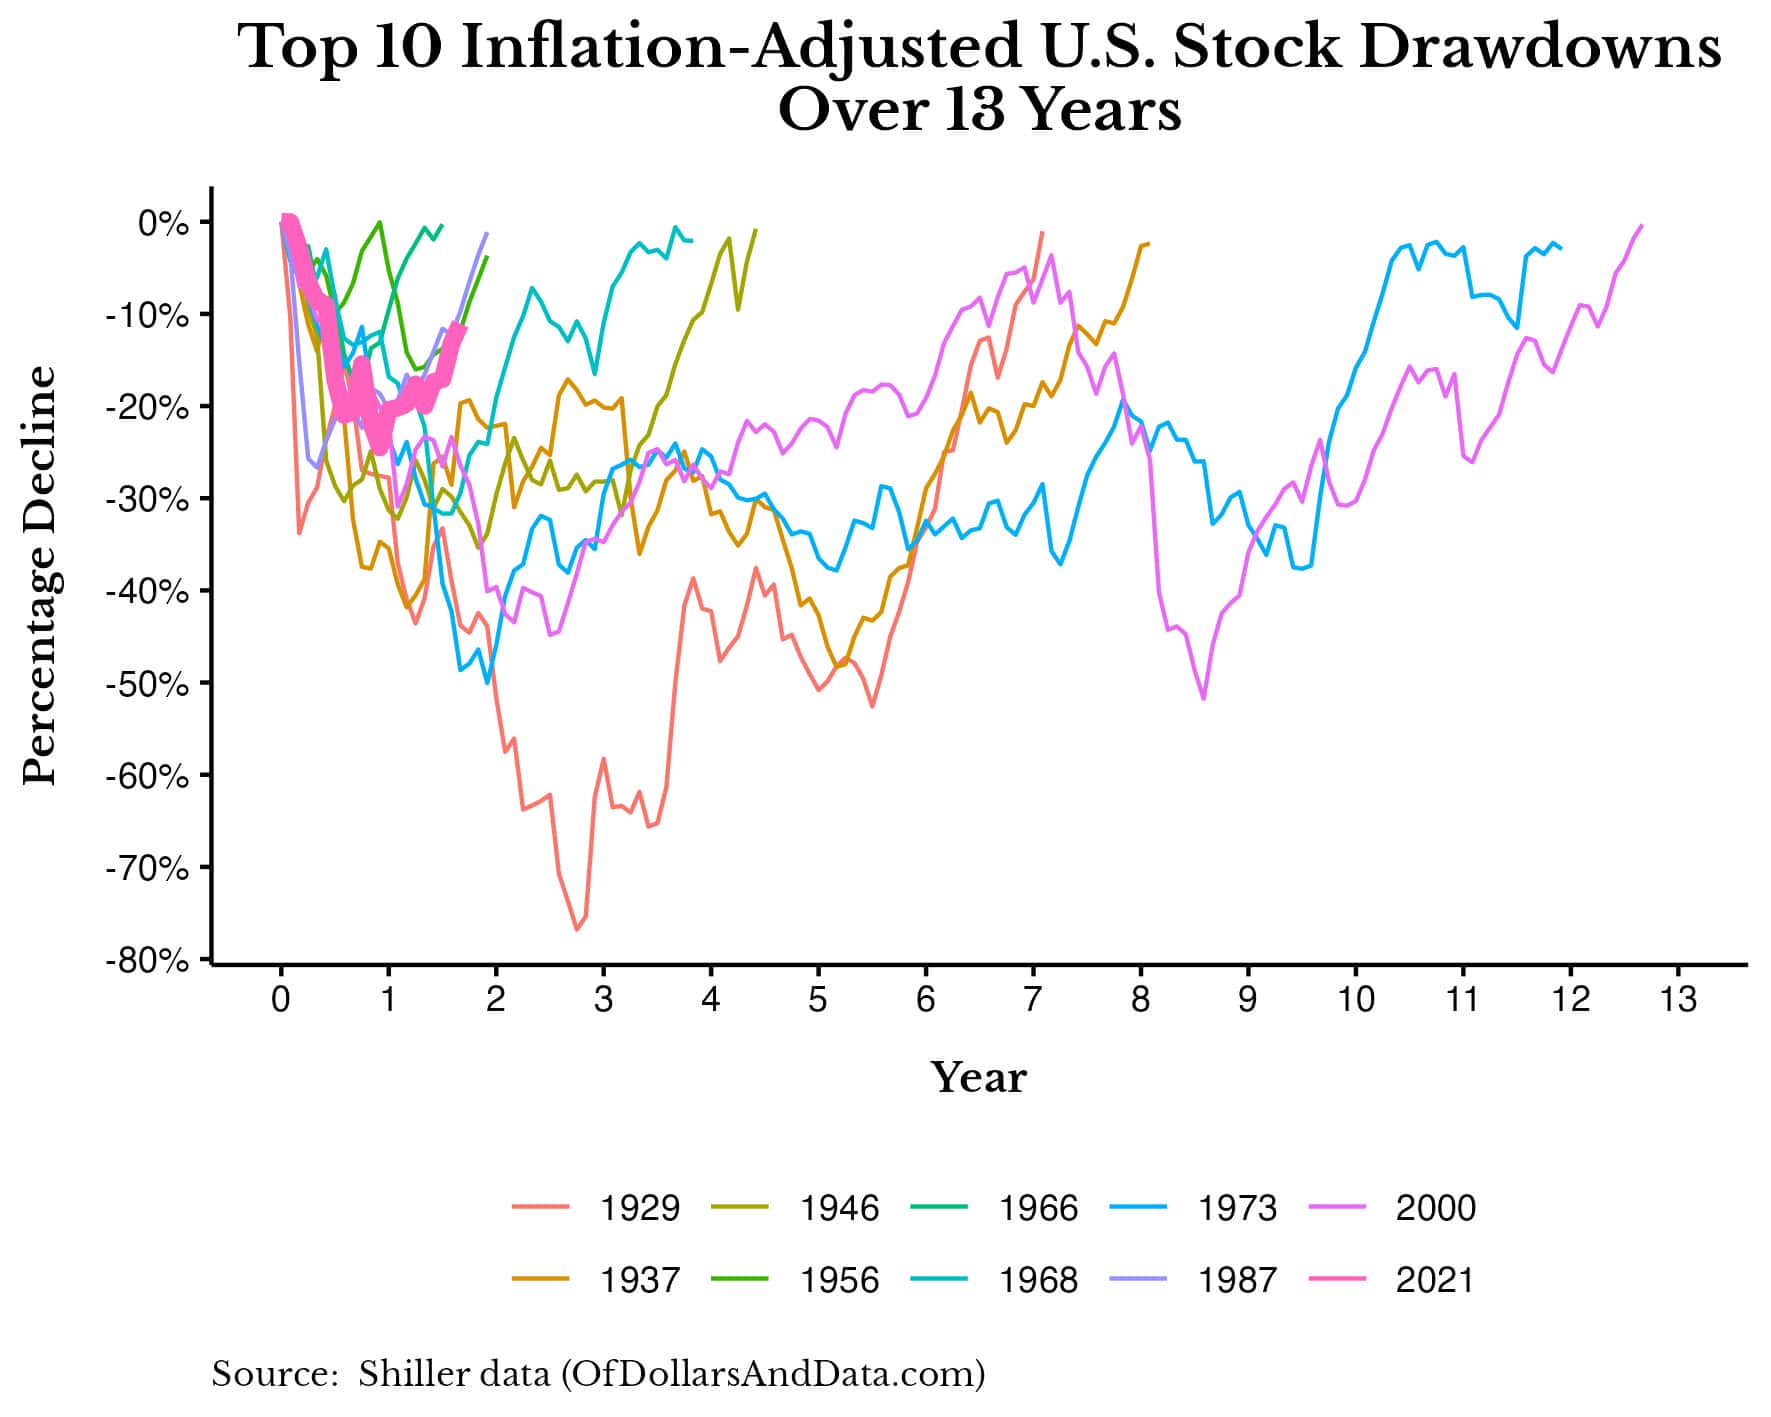 Chart of the top 10 inflation-adjusted drawdowns in U.S. stocks over 13 years.